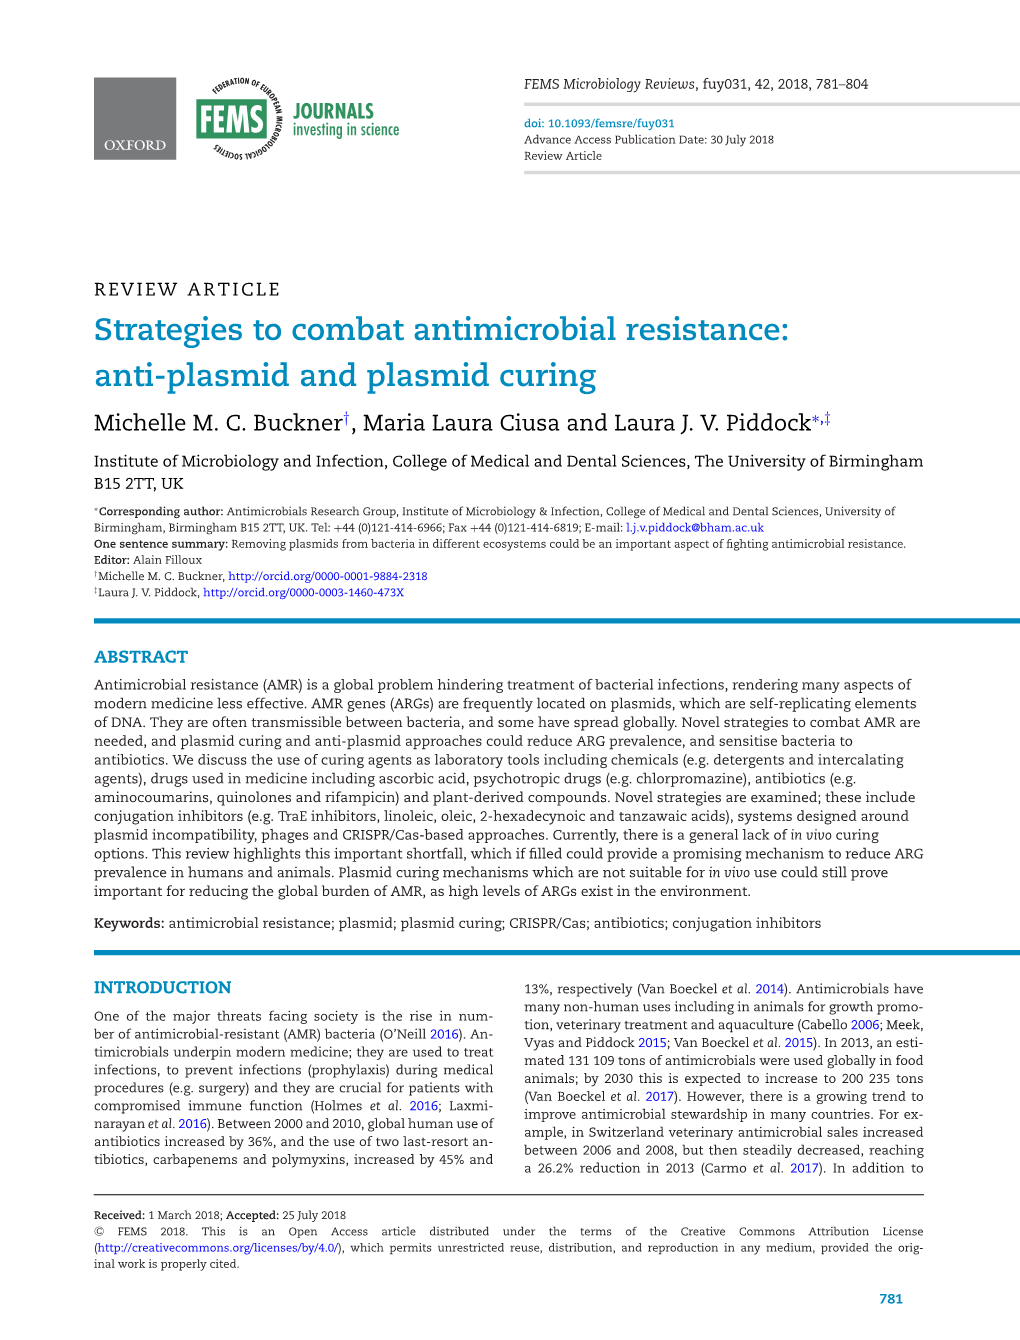 Strategies to Combat Antimicrobial Resistance: Anti-Plasmid and Plasmid Curing Michelle M